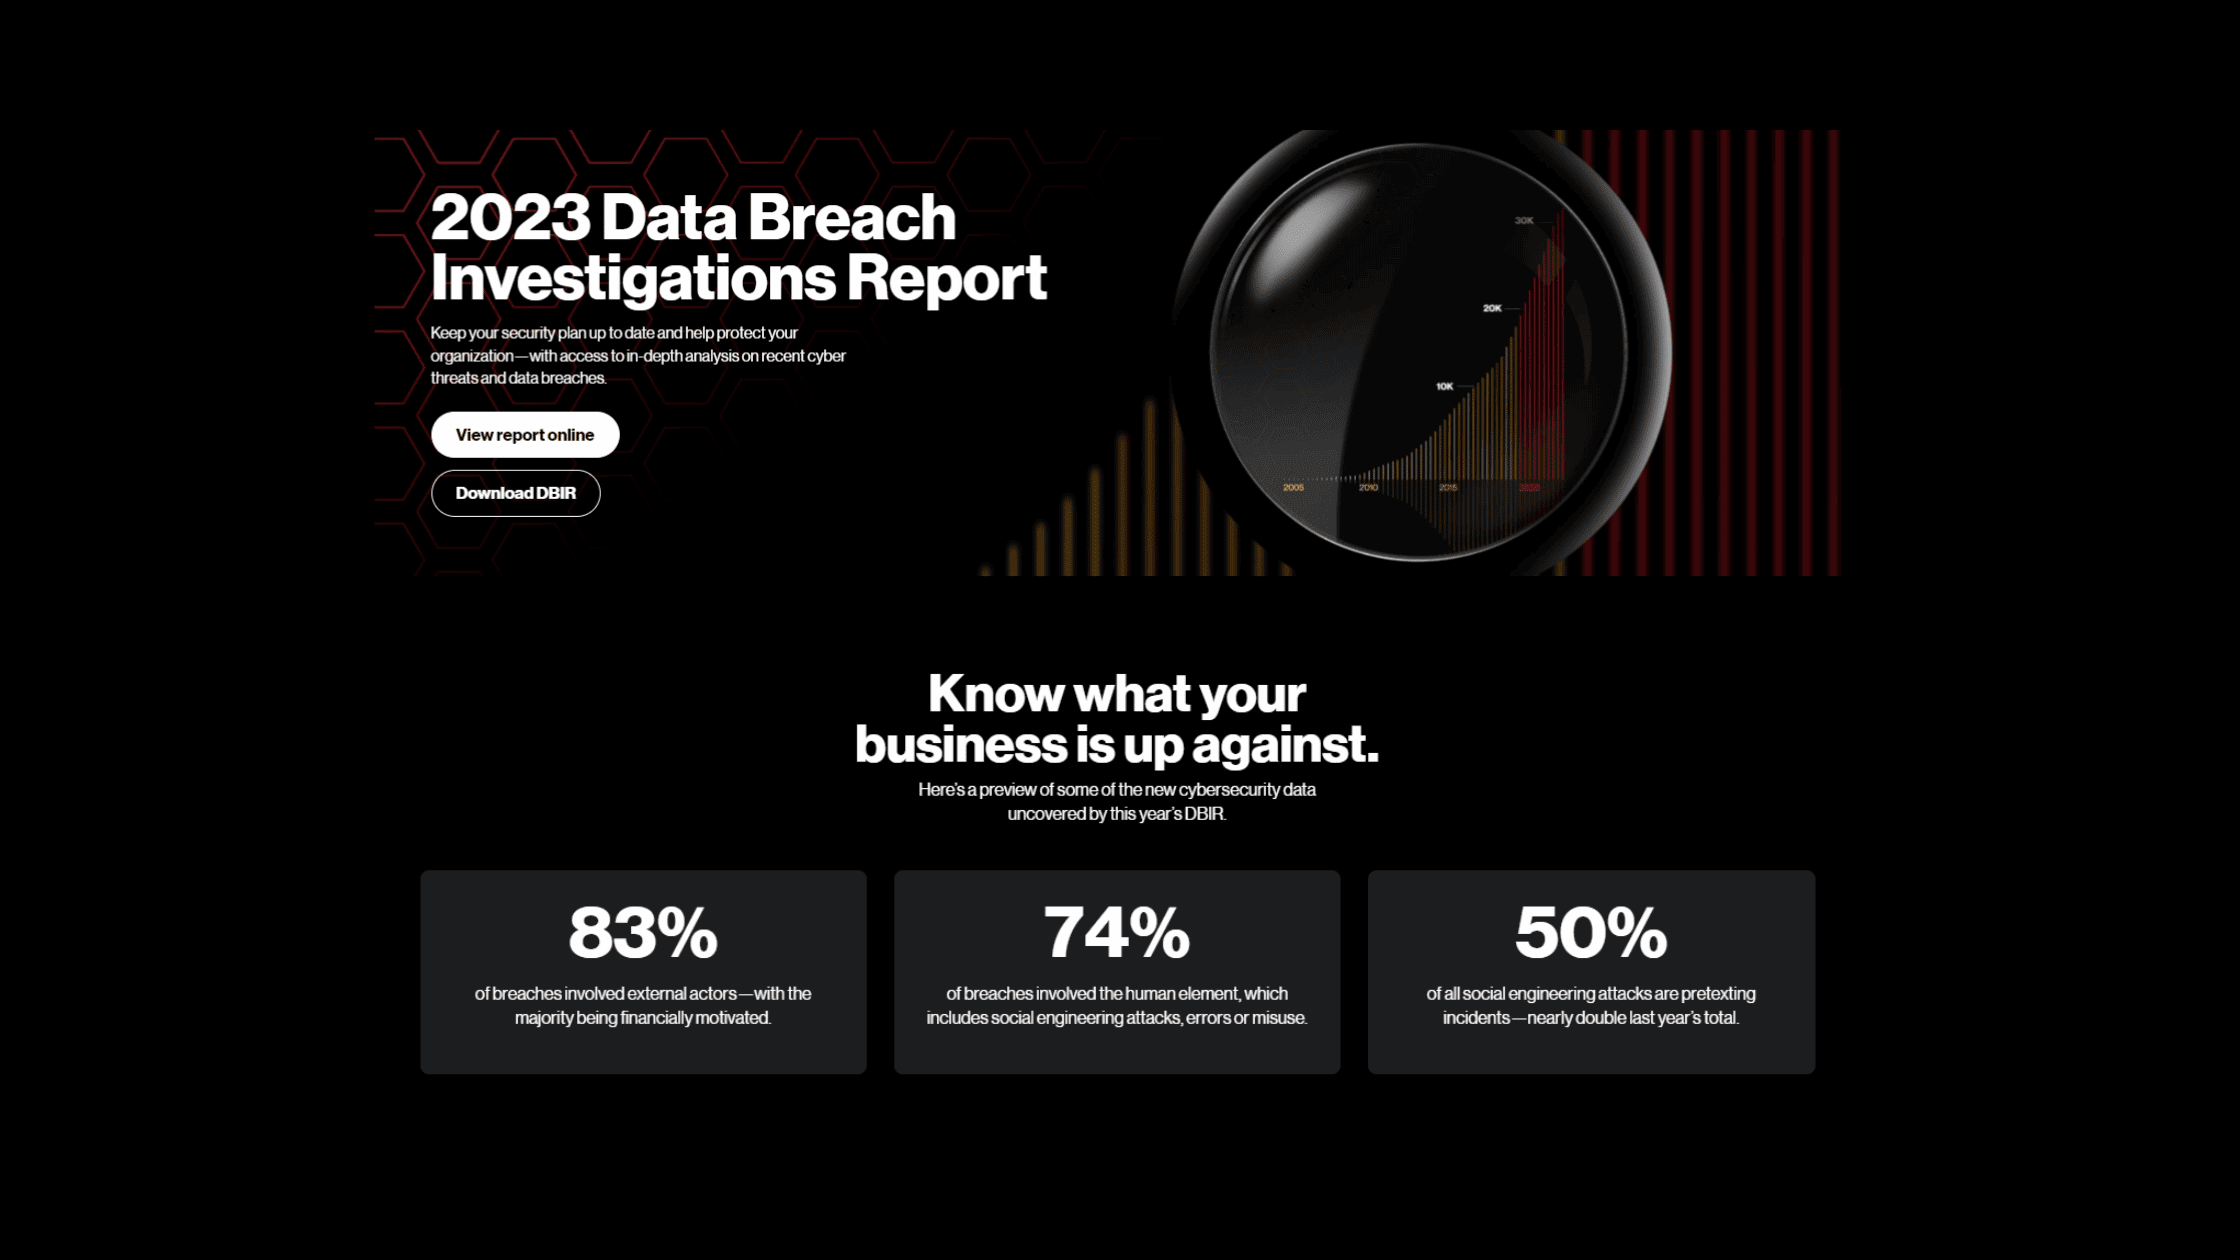 What Is There In The Verizons Data Breach Investigations Report 2023